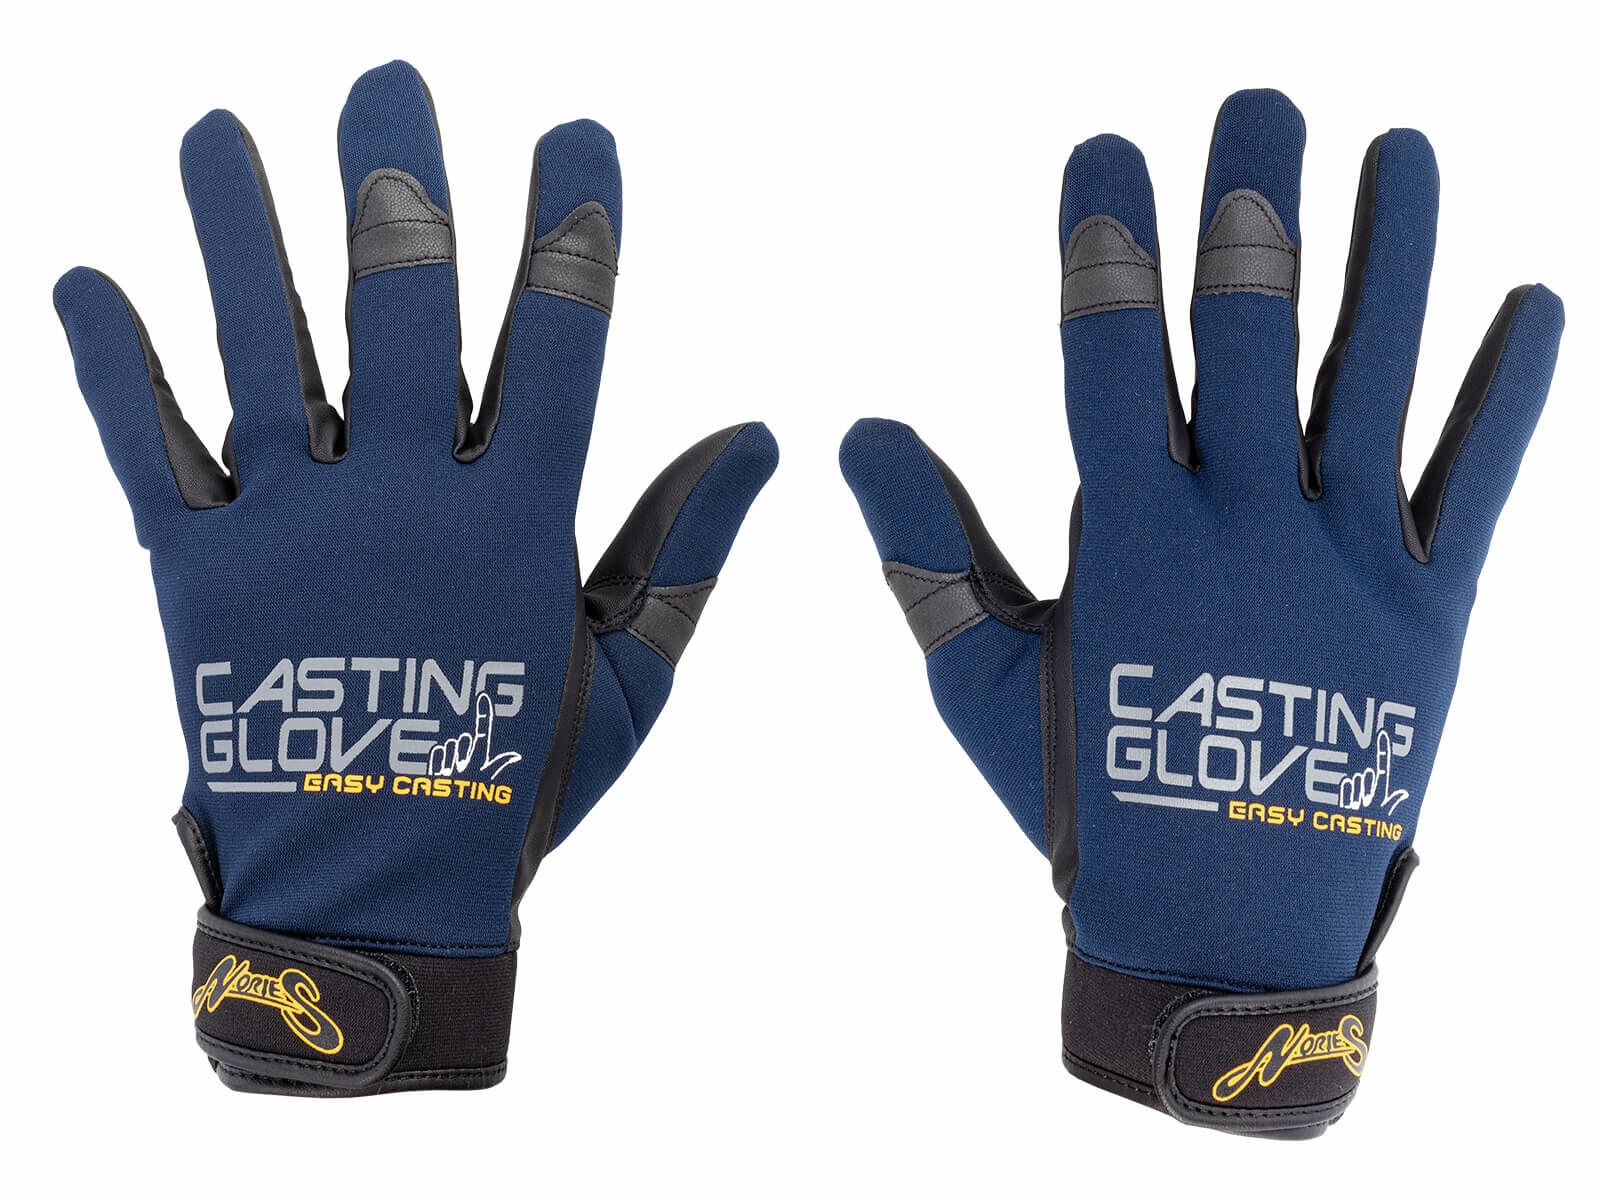 NORIES Casting Gloves NS-03 Navy Size M